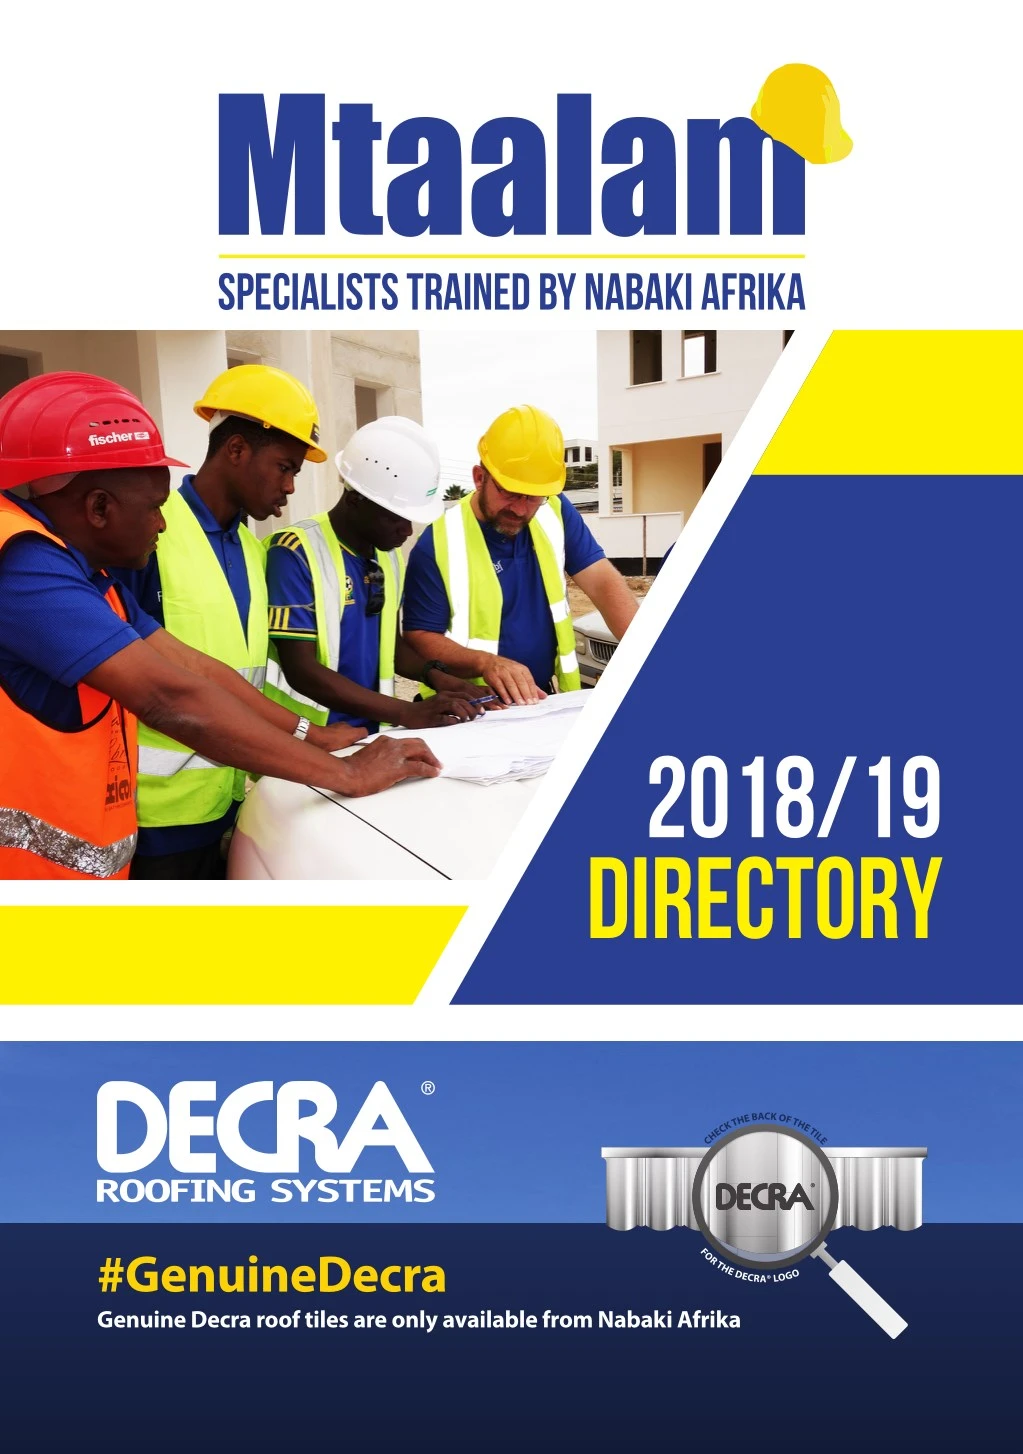 specialists trained by nabaki afrika